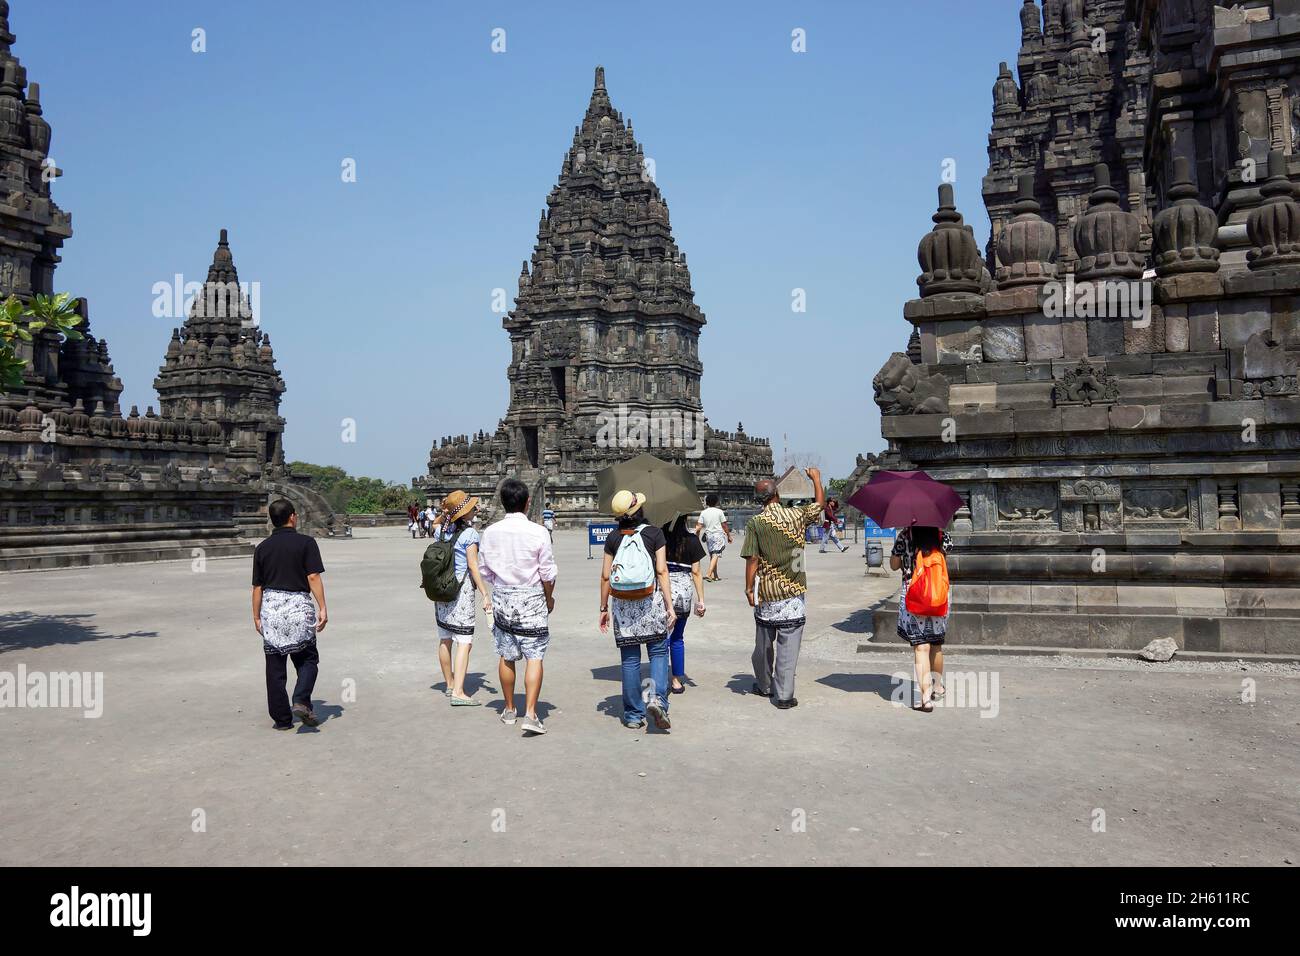 Group of Asian people with tour guide walking around ancient hindu Prambanan Temple complex. Sunny clear blue sky background. Stock Photo